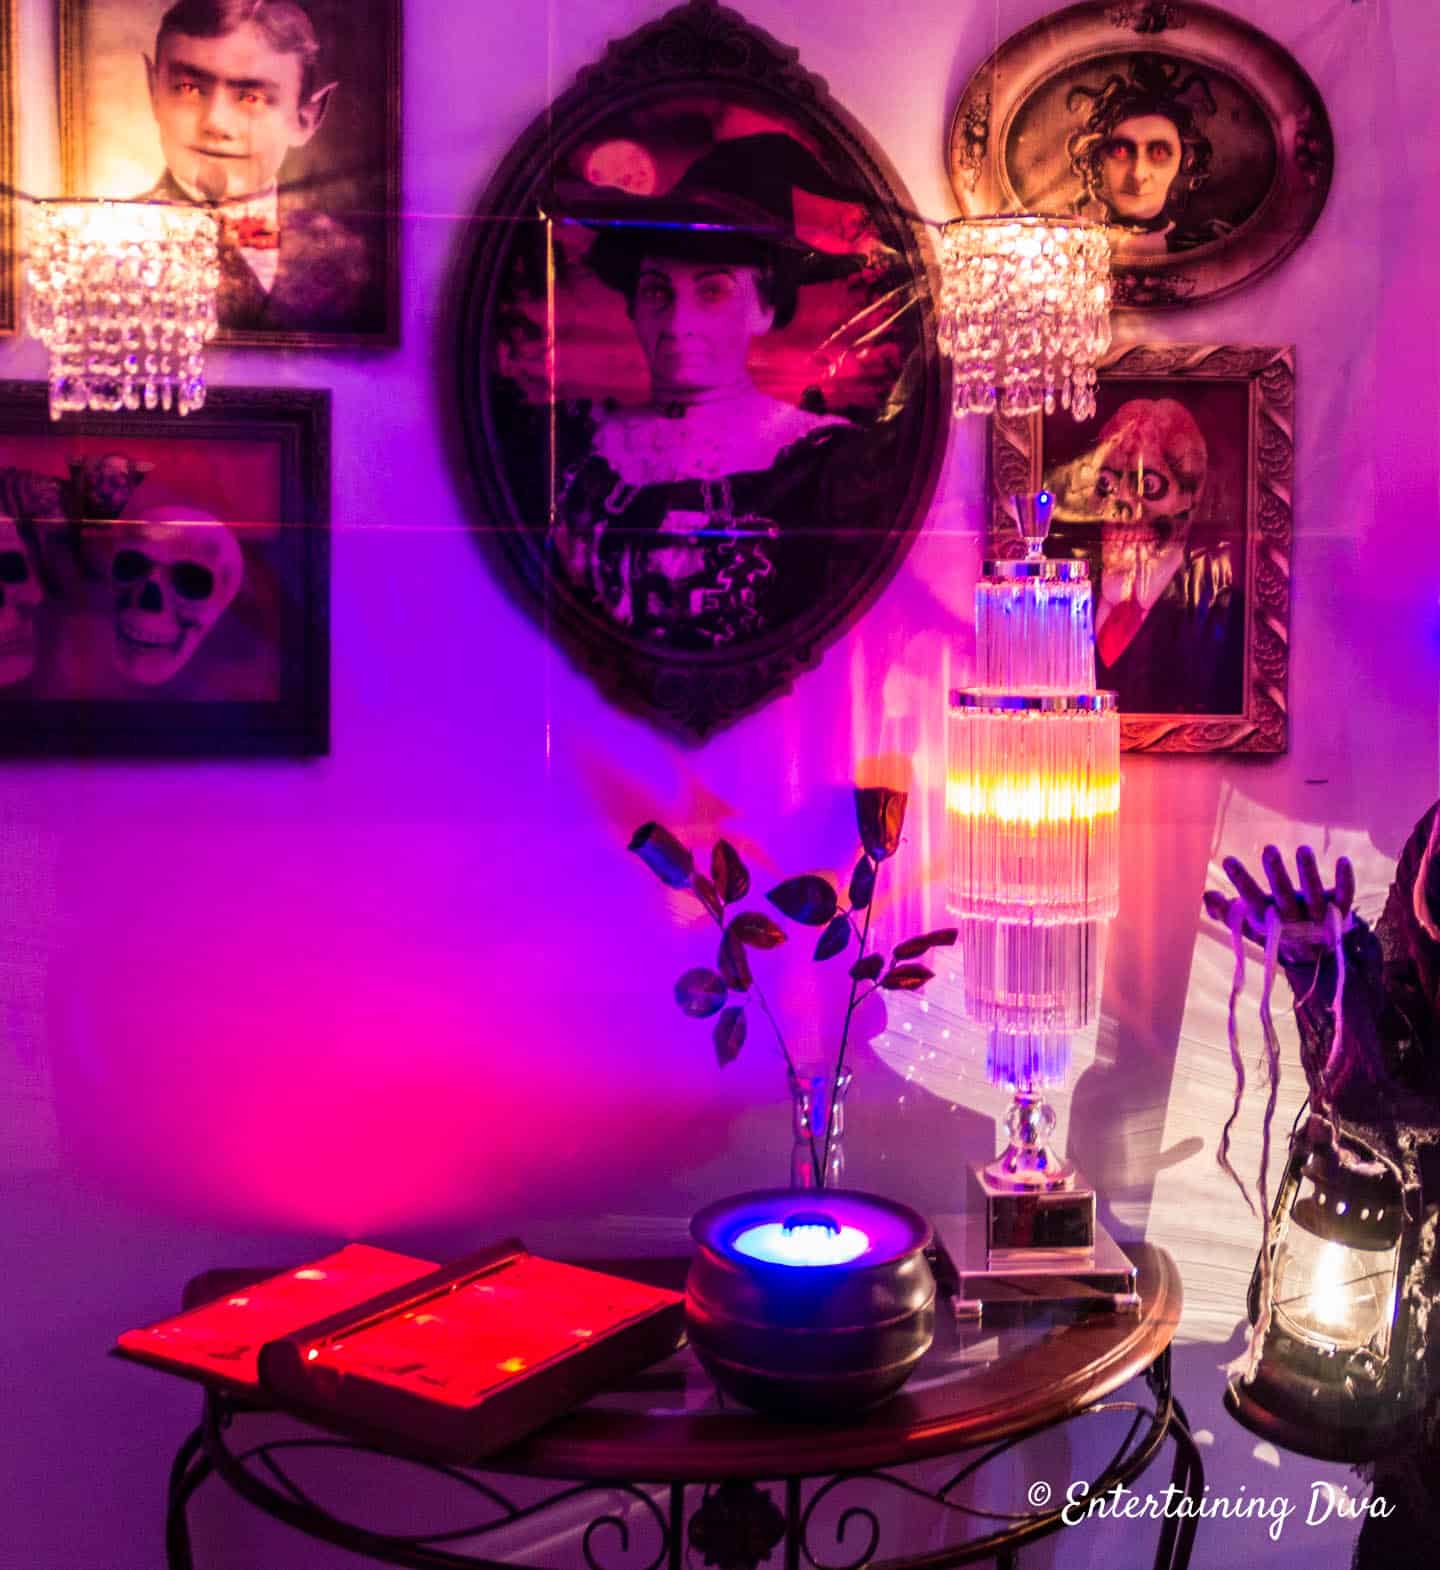 Lighted Halloween props (spell book and misting witch cauldron) on a table below some haunted pictures